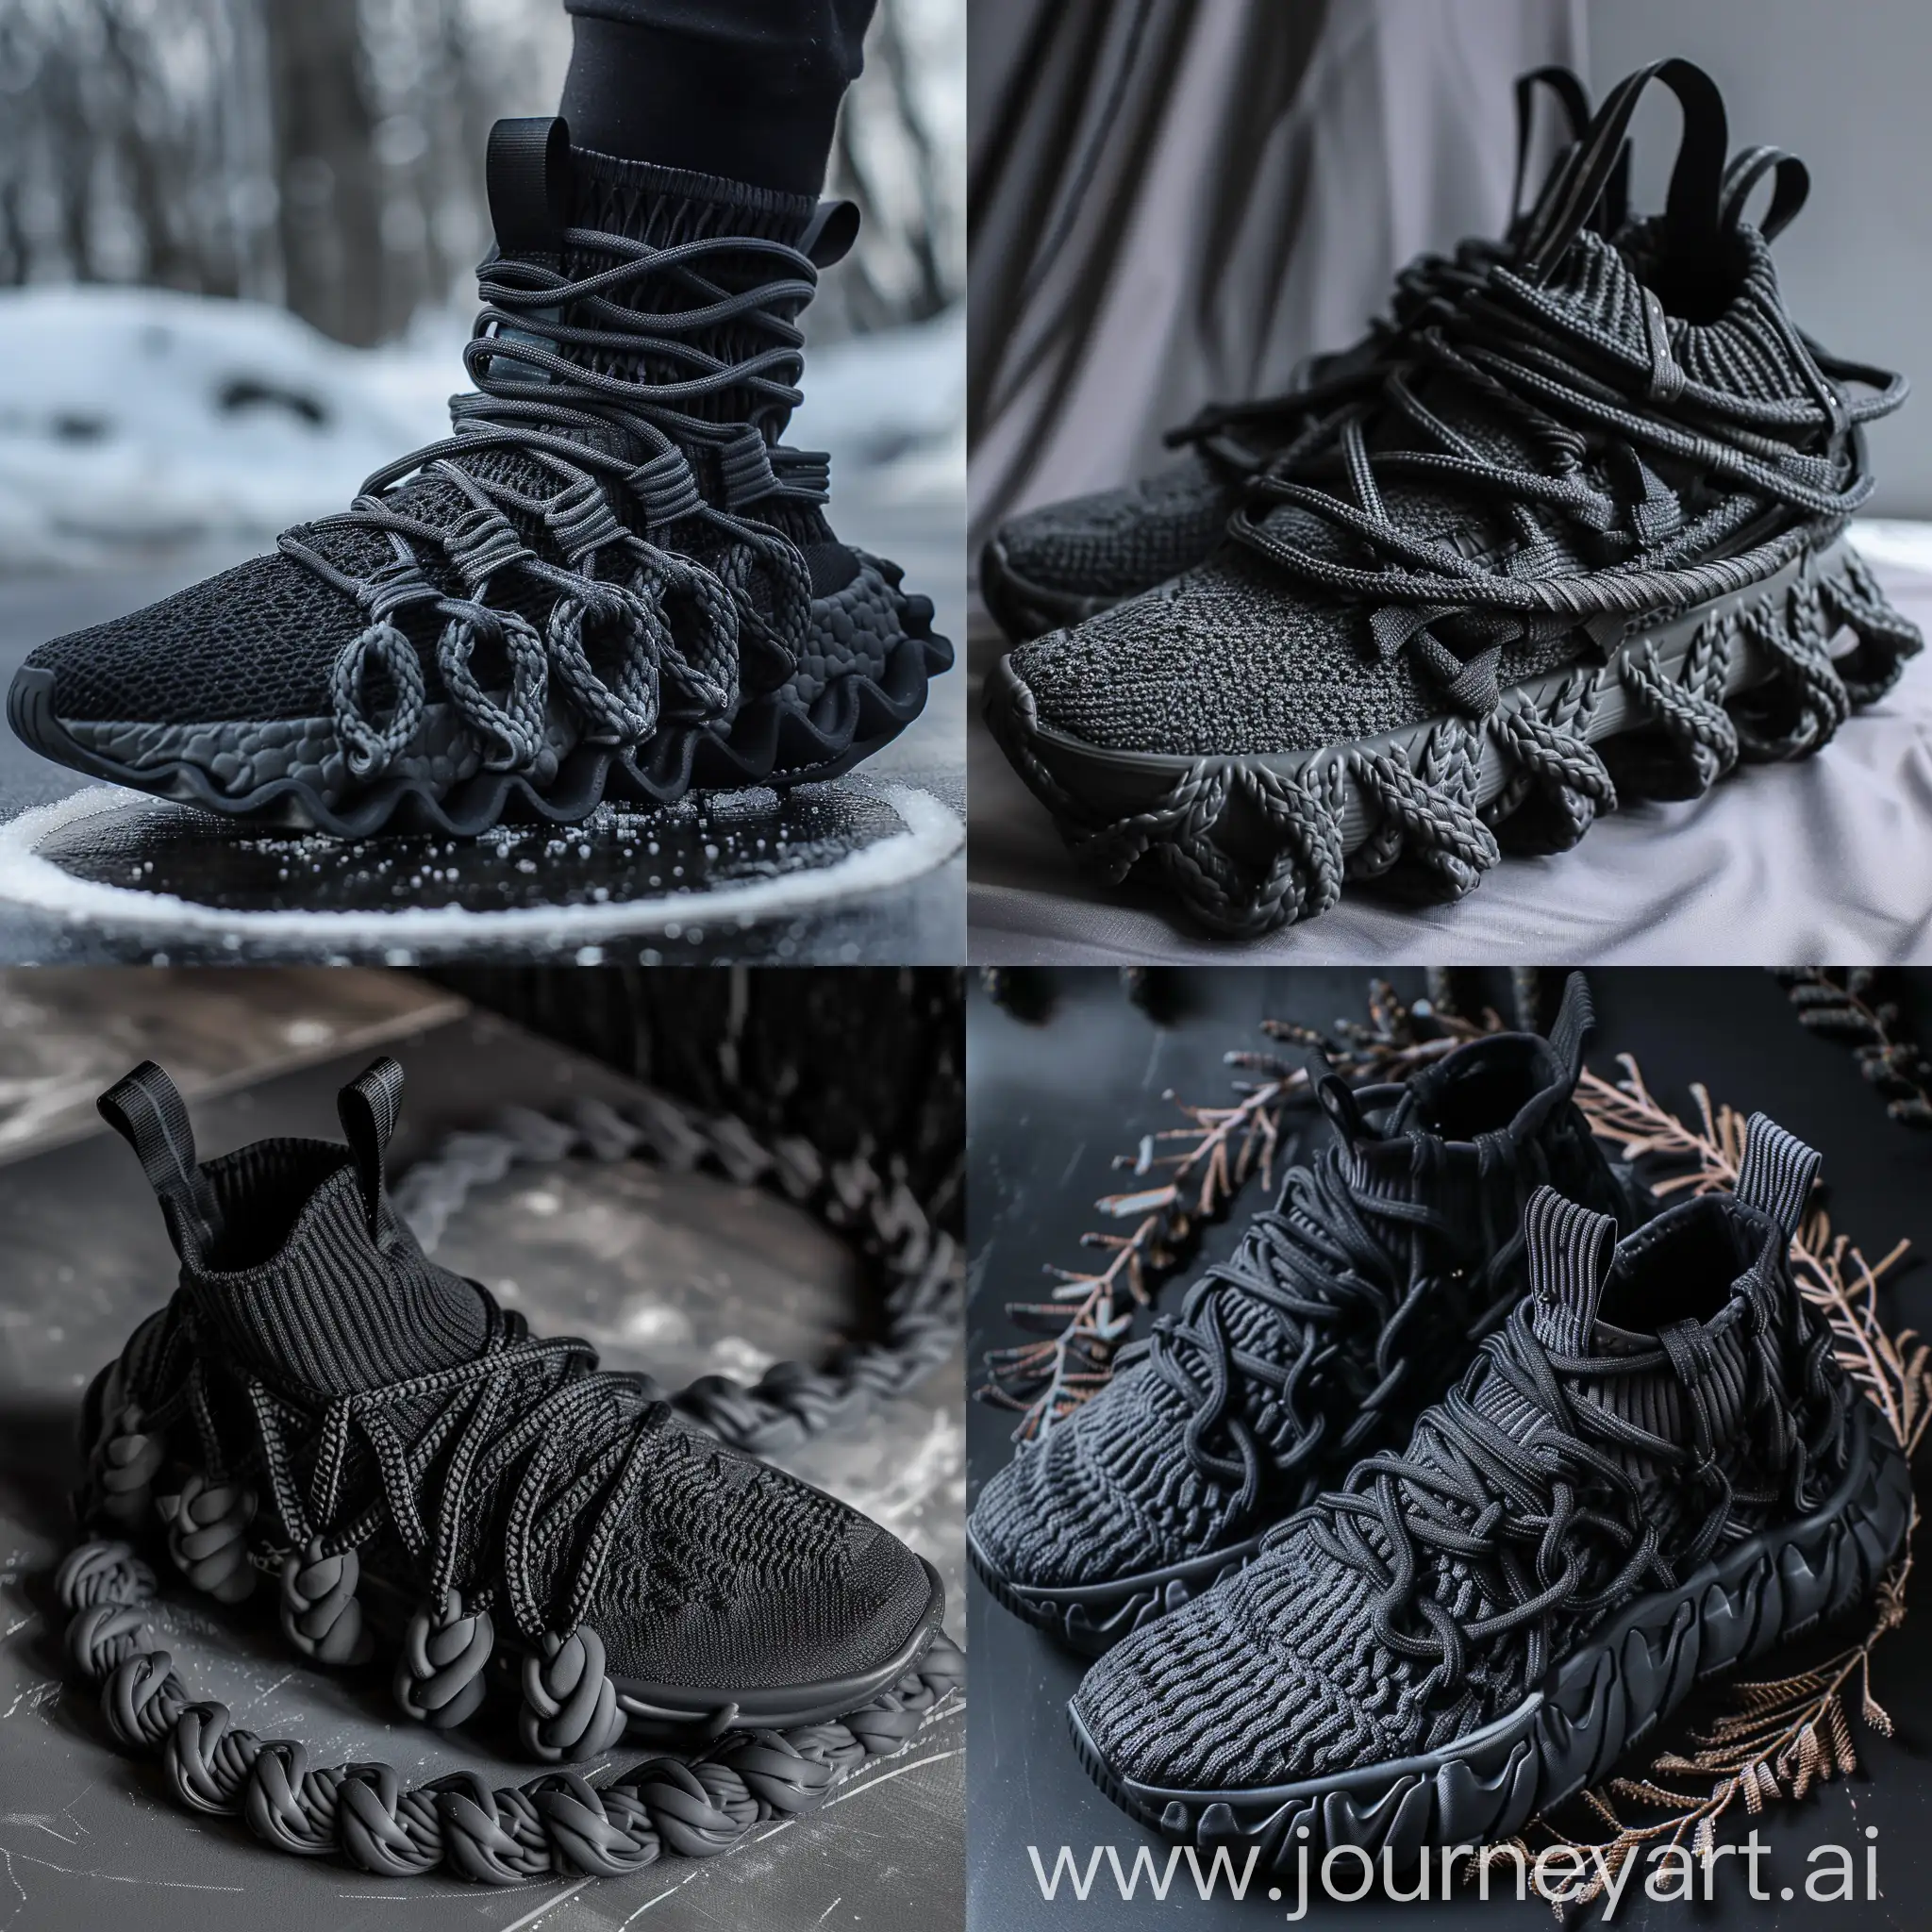 Sneakers design , inspiration by knitted fabrics , some knitted cables on it , knitted cables inspiration rubber midsole , knitted cables on midsole , chunky , trendy , color black , knitted laces , circle of 5 laces around the top of sneakers , street wear fashion , futuristic 